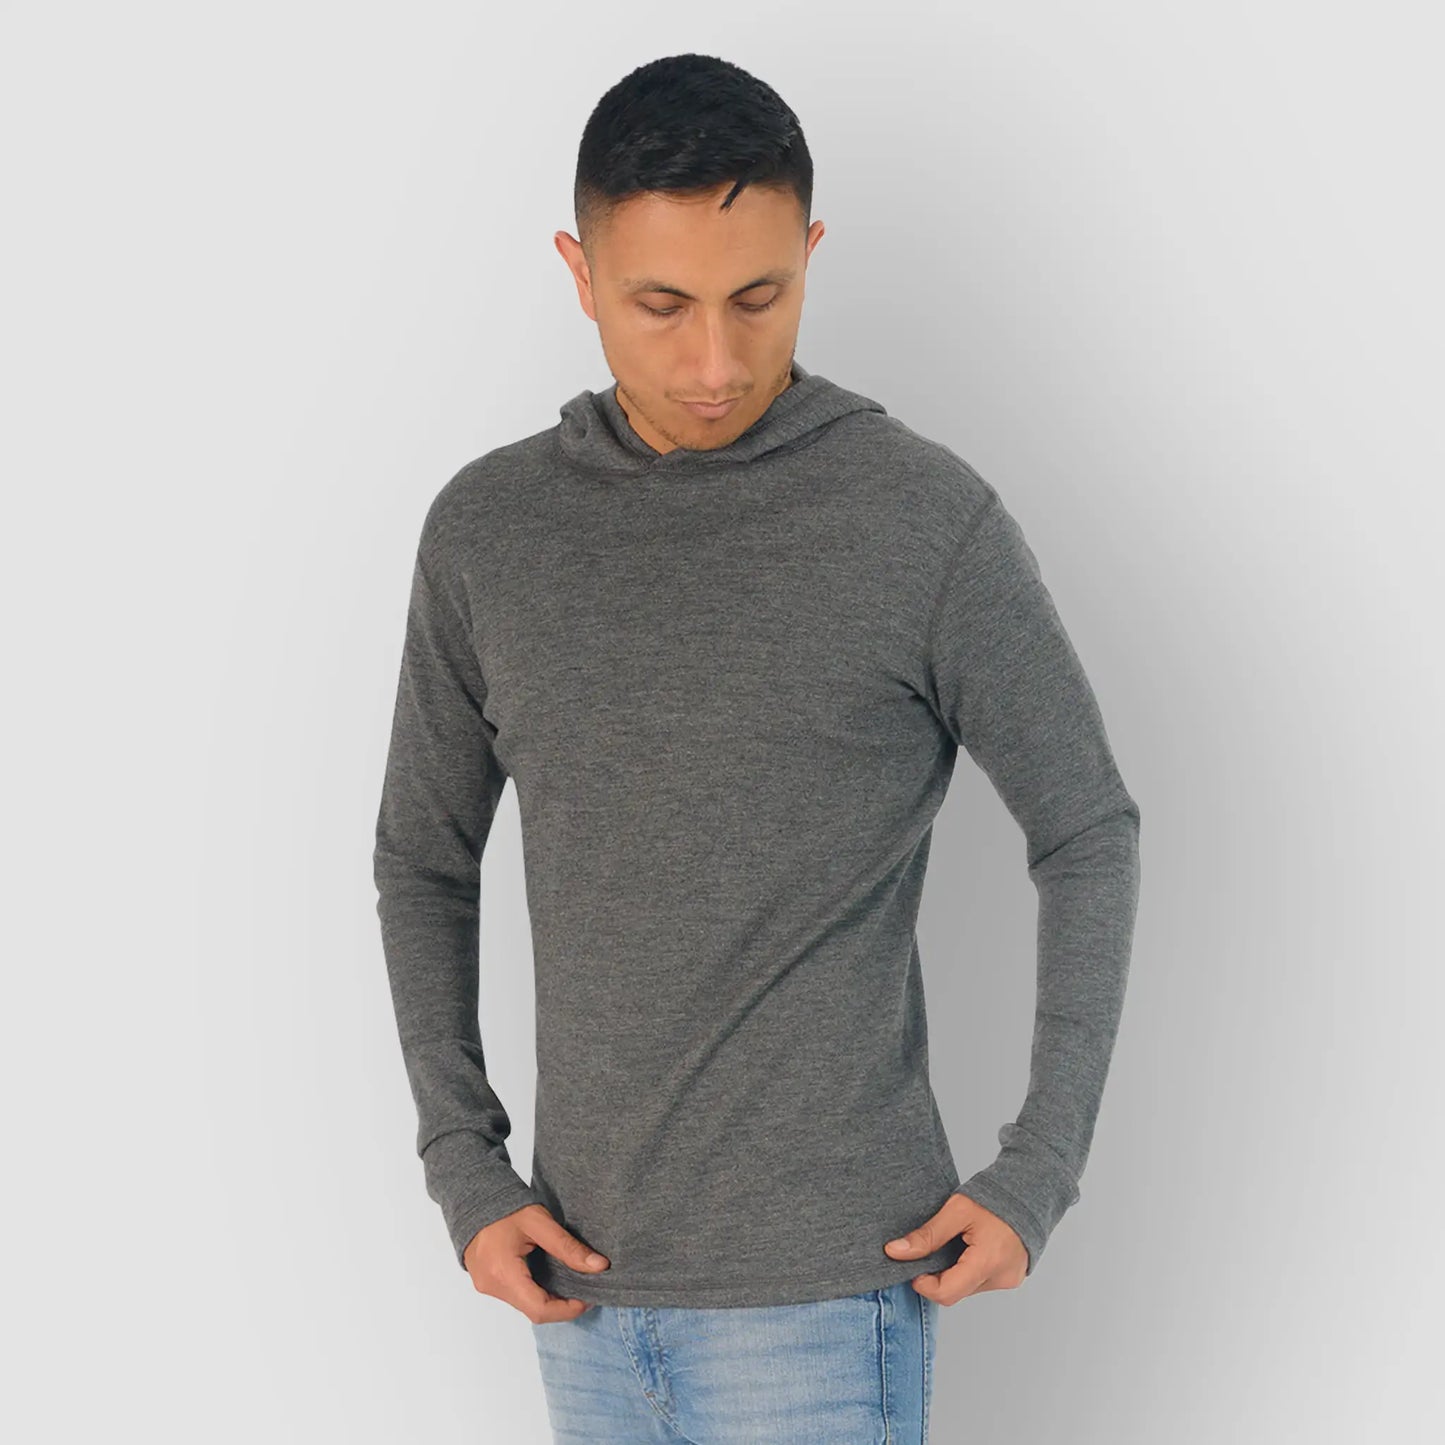 mens breathable pullover hoodie lightweight color gray